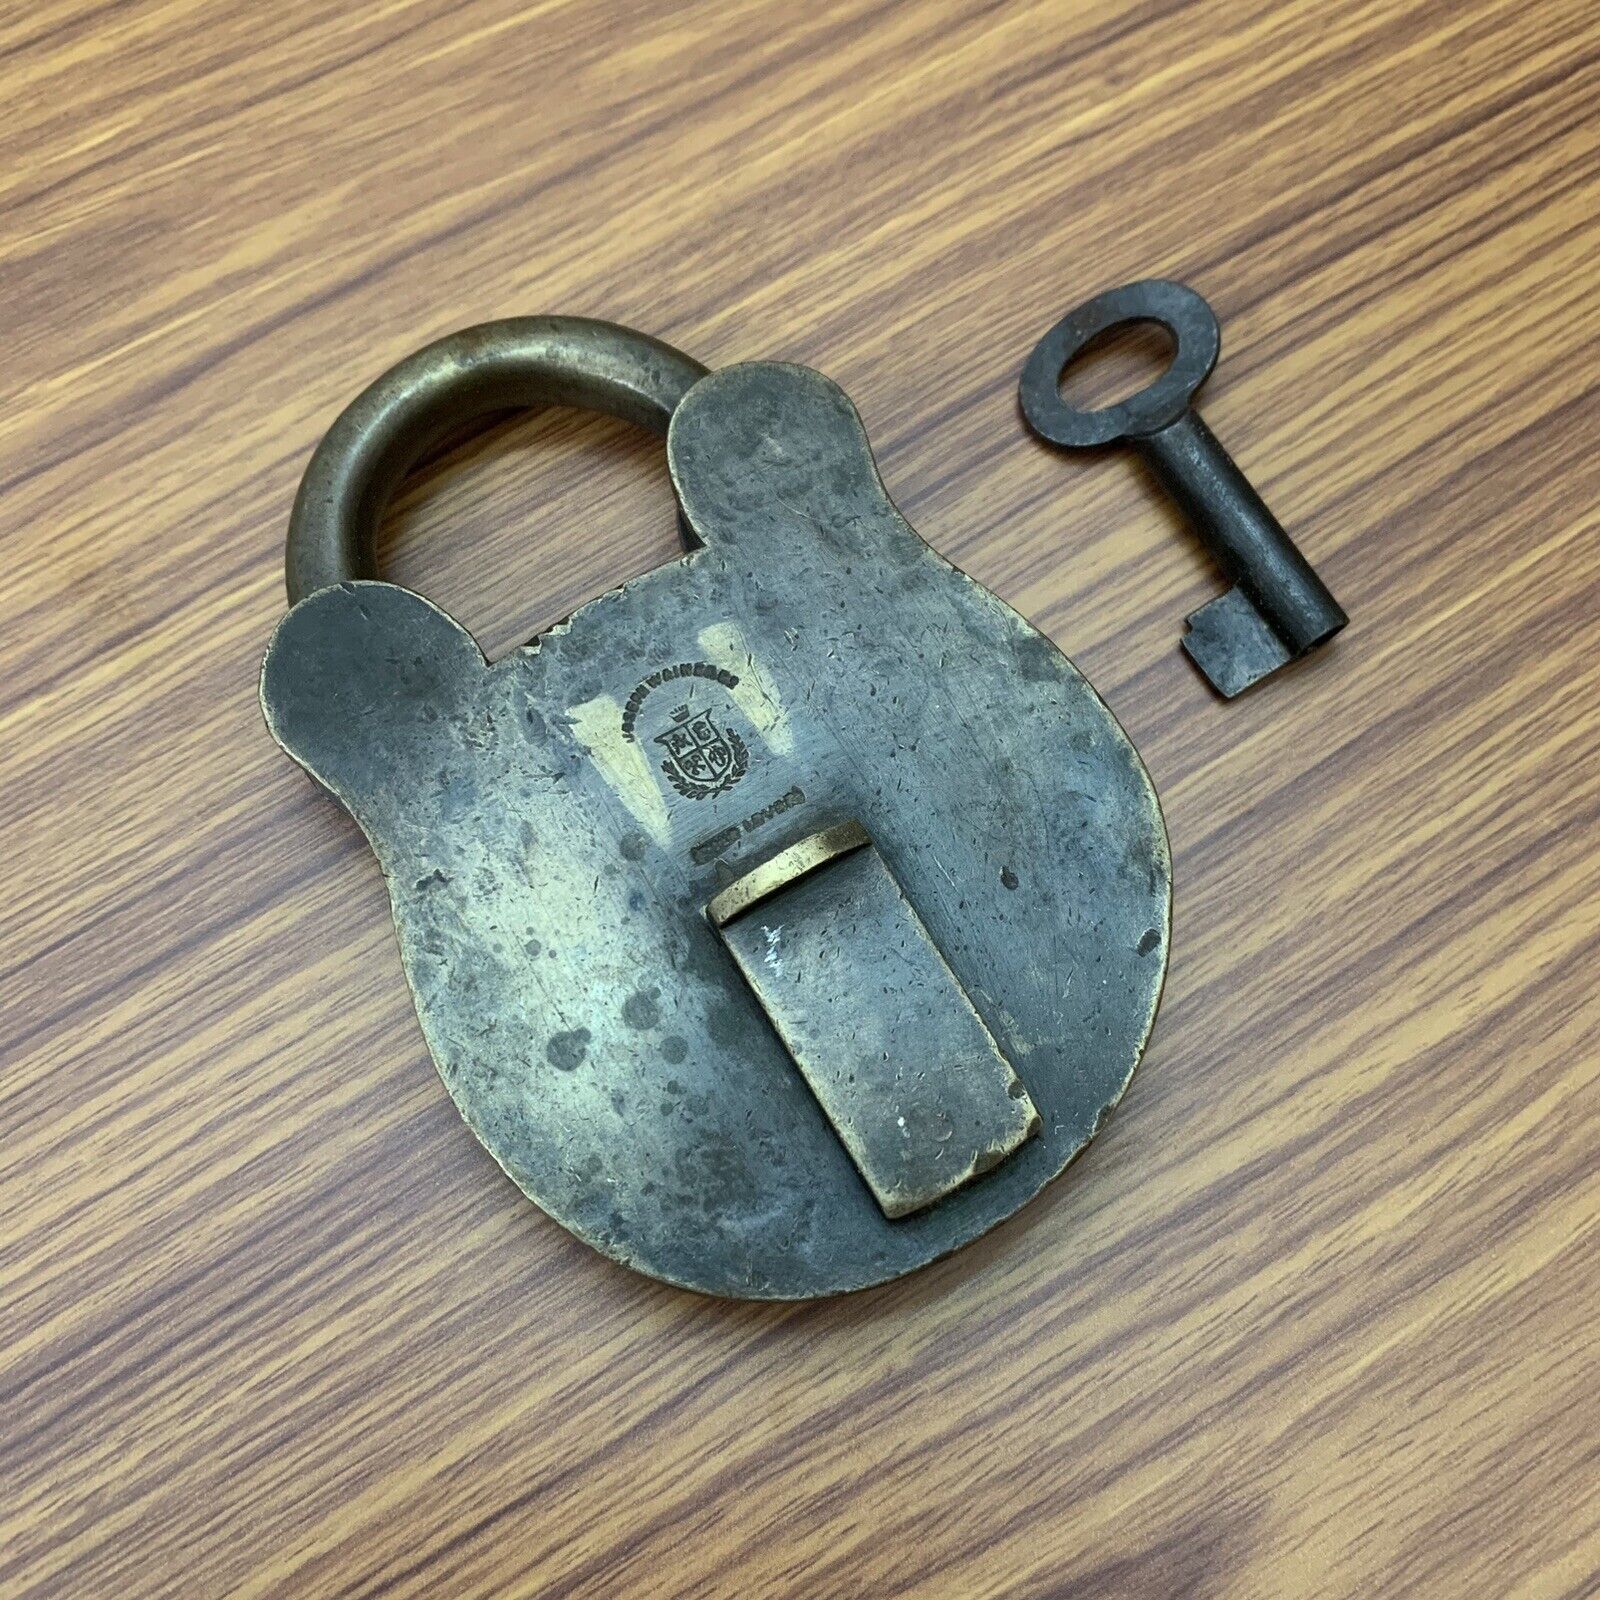 BRASS PADLOCK OR LOCK WITH KEY, OLD OR ANTIQUE, ENGLISH MAKE, big sized.